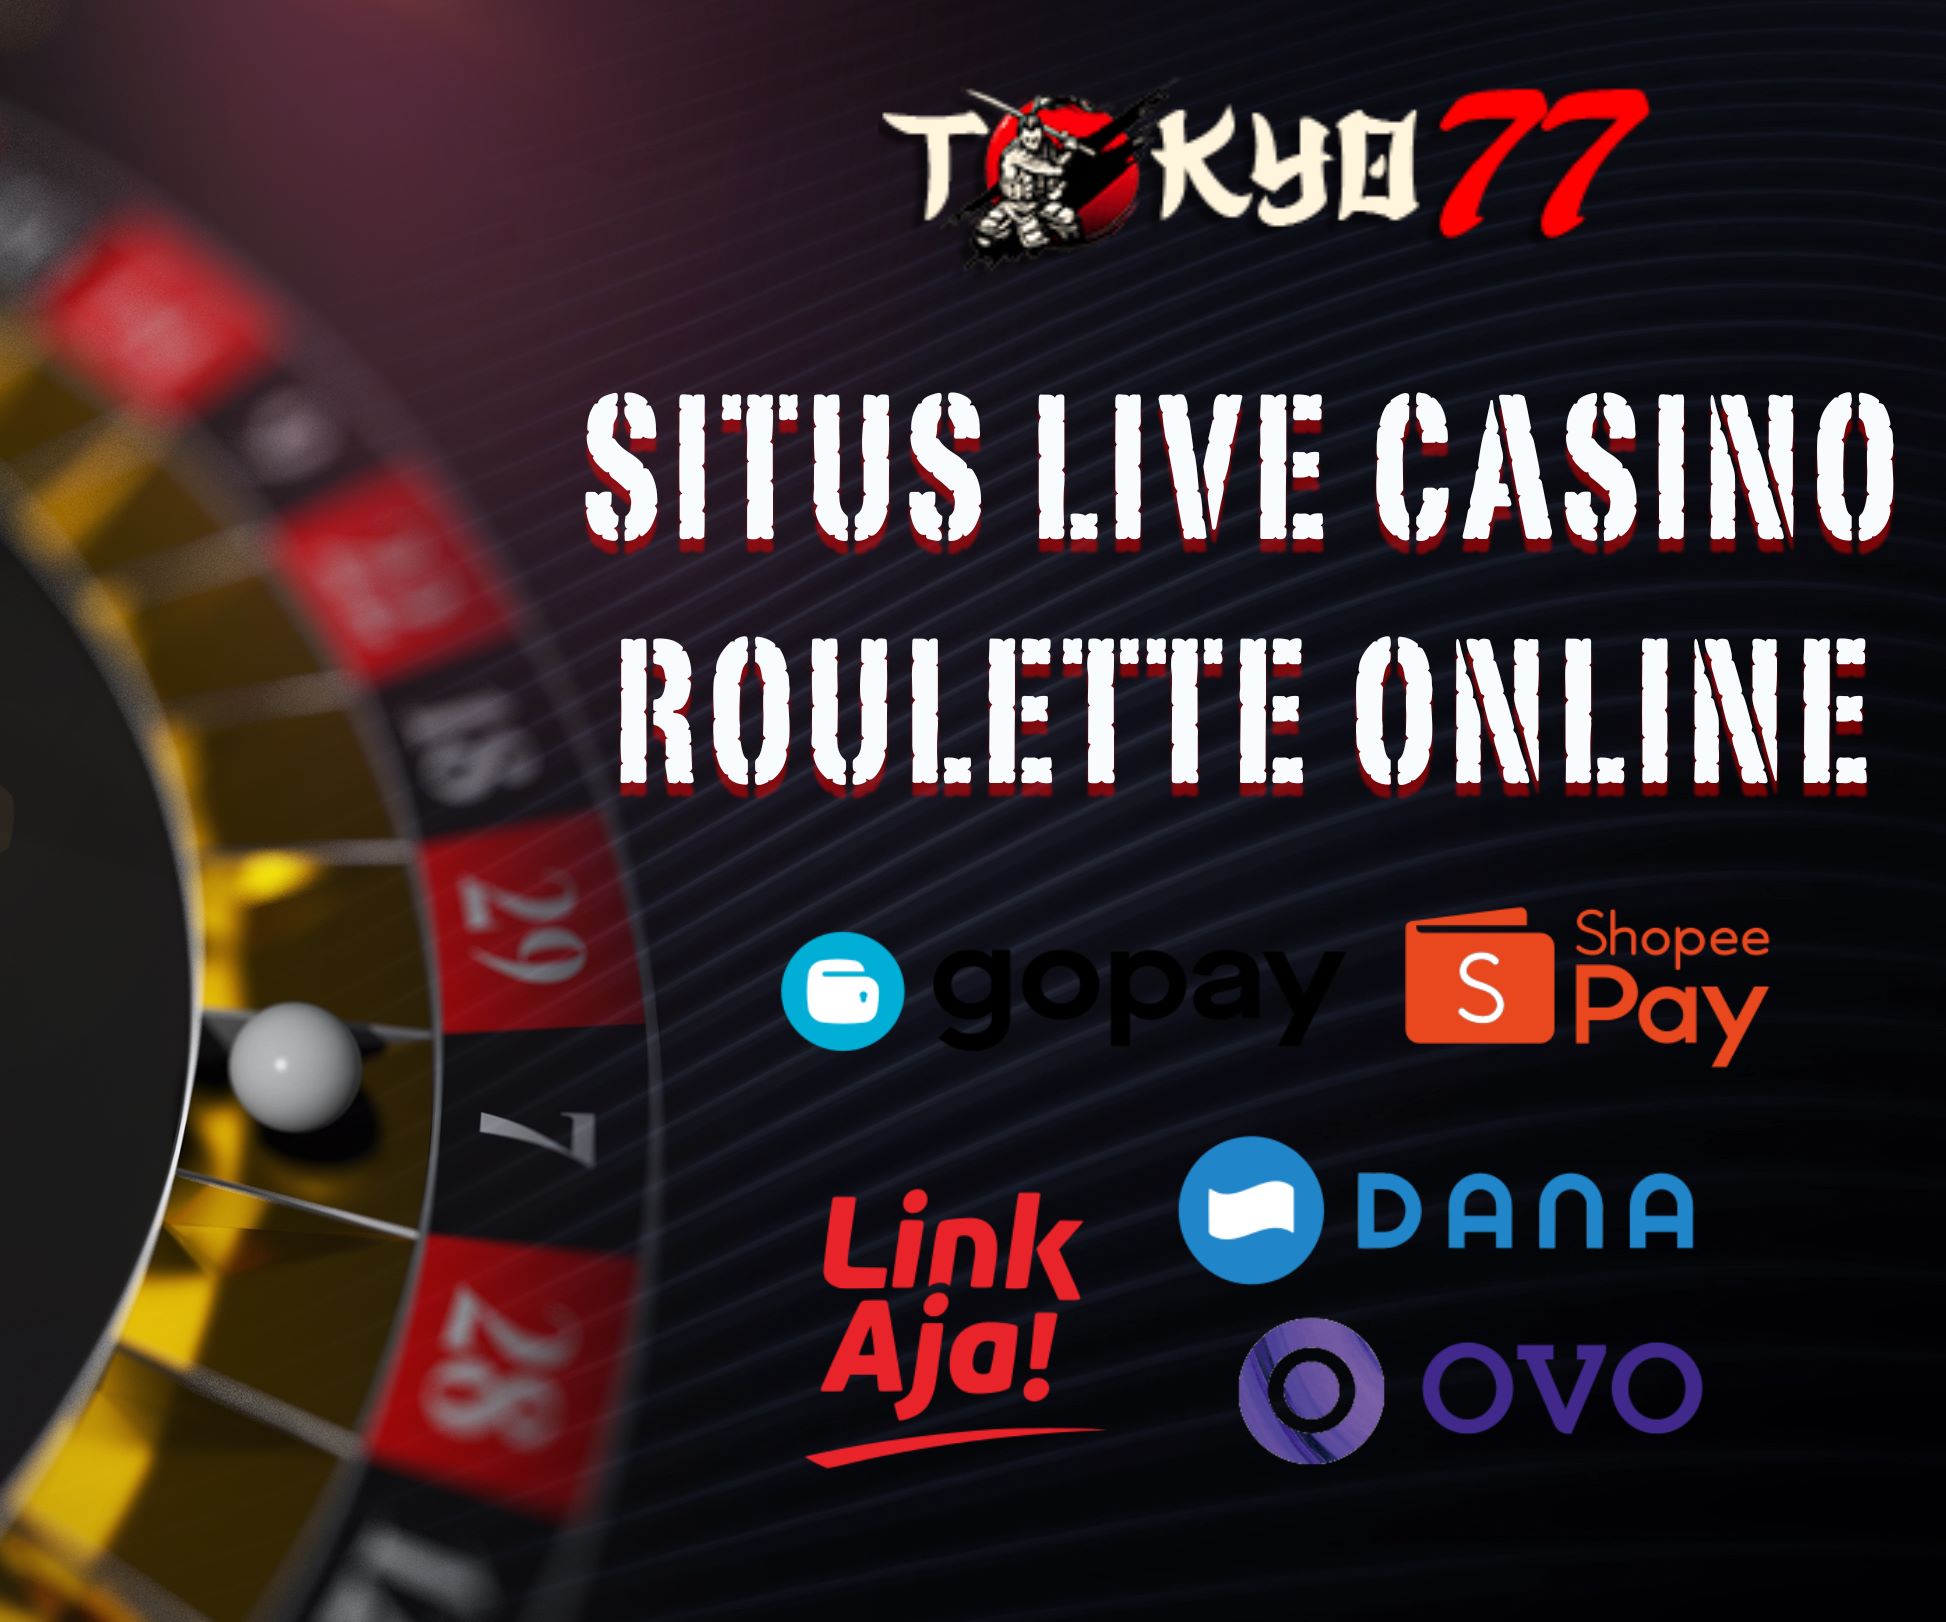 Procedures for Playing Live Casino Roulette Correctly